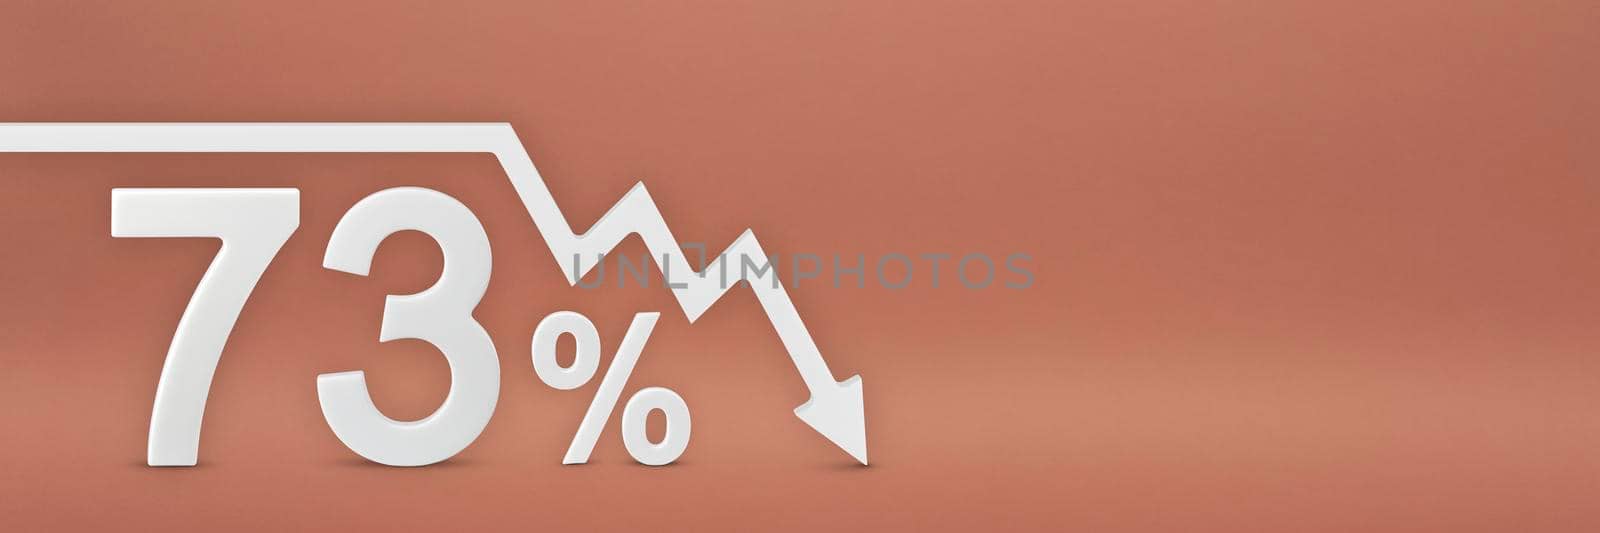 seventy-three percent, the arrow on the graph is pointing down. Stock market crash, bear market, inflation.Economic collapse, collapse of stocks.3d banner,73 percent discount sign on a red background